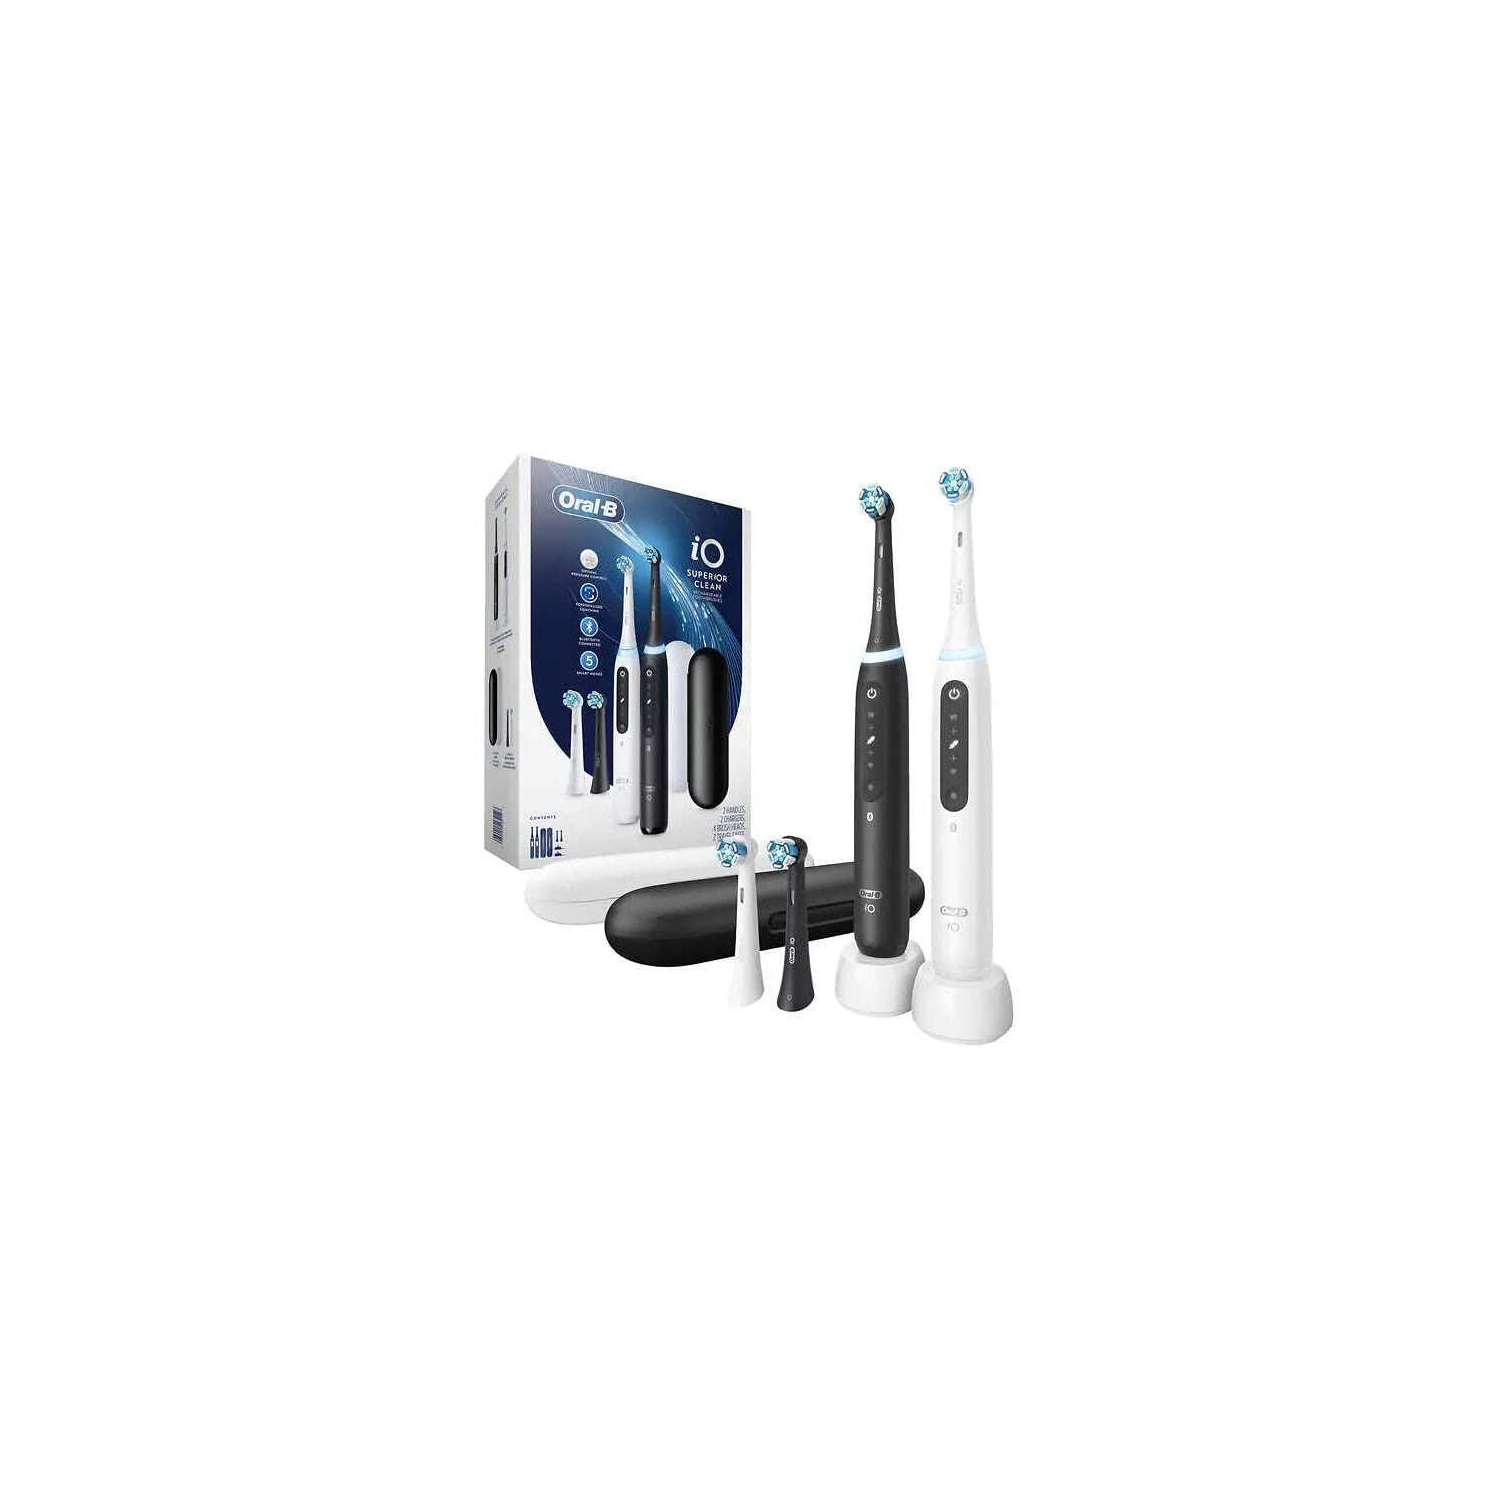 Oral-B iO Series 5 Rechargeable Toothbrush Dual Pack